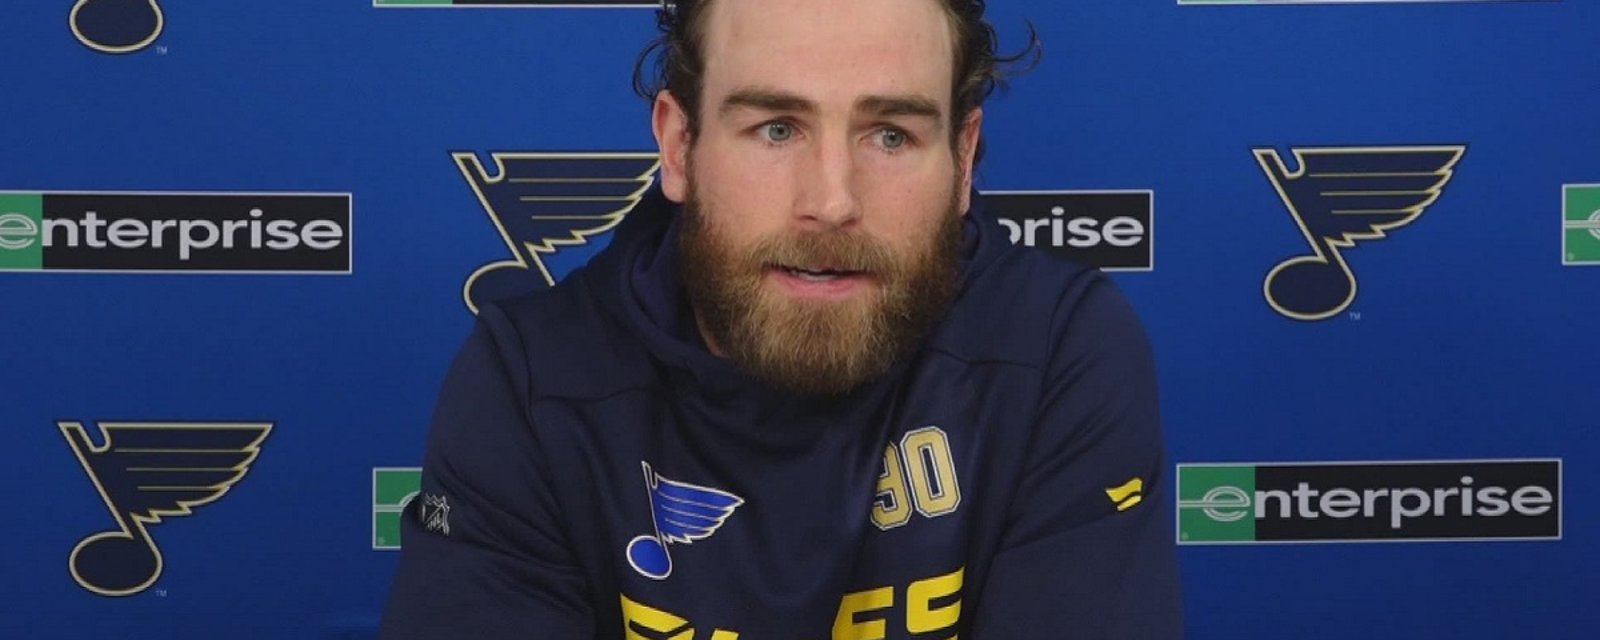 Blues captain Ryan O'Reilly issues a playoff guarantee.